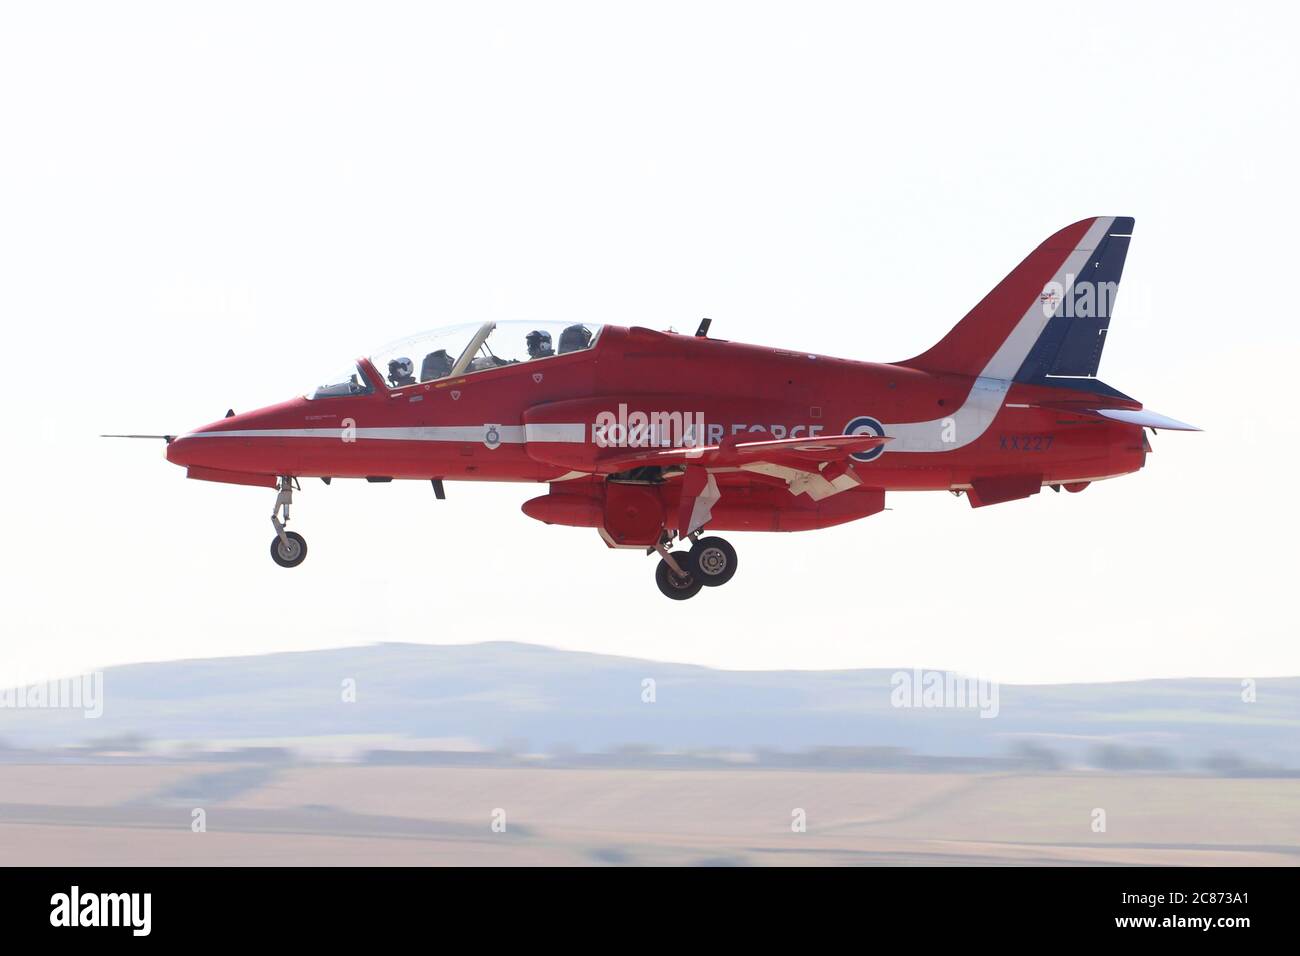 XX227, a BAe Hawk T1 of the Royal Air Force aerobatic display team, the Red Arrows, at RAF Leuchars in 2013. Stock Photo